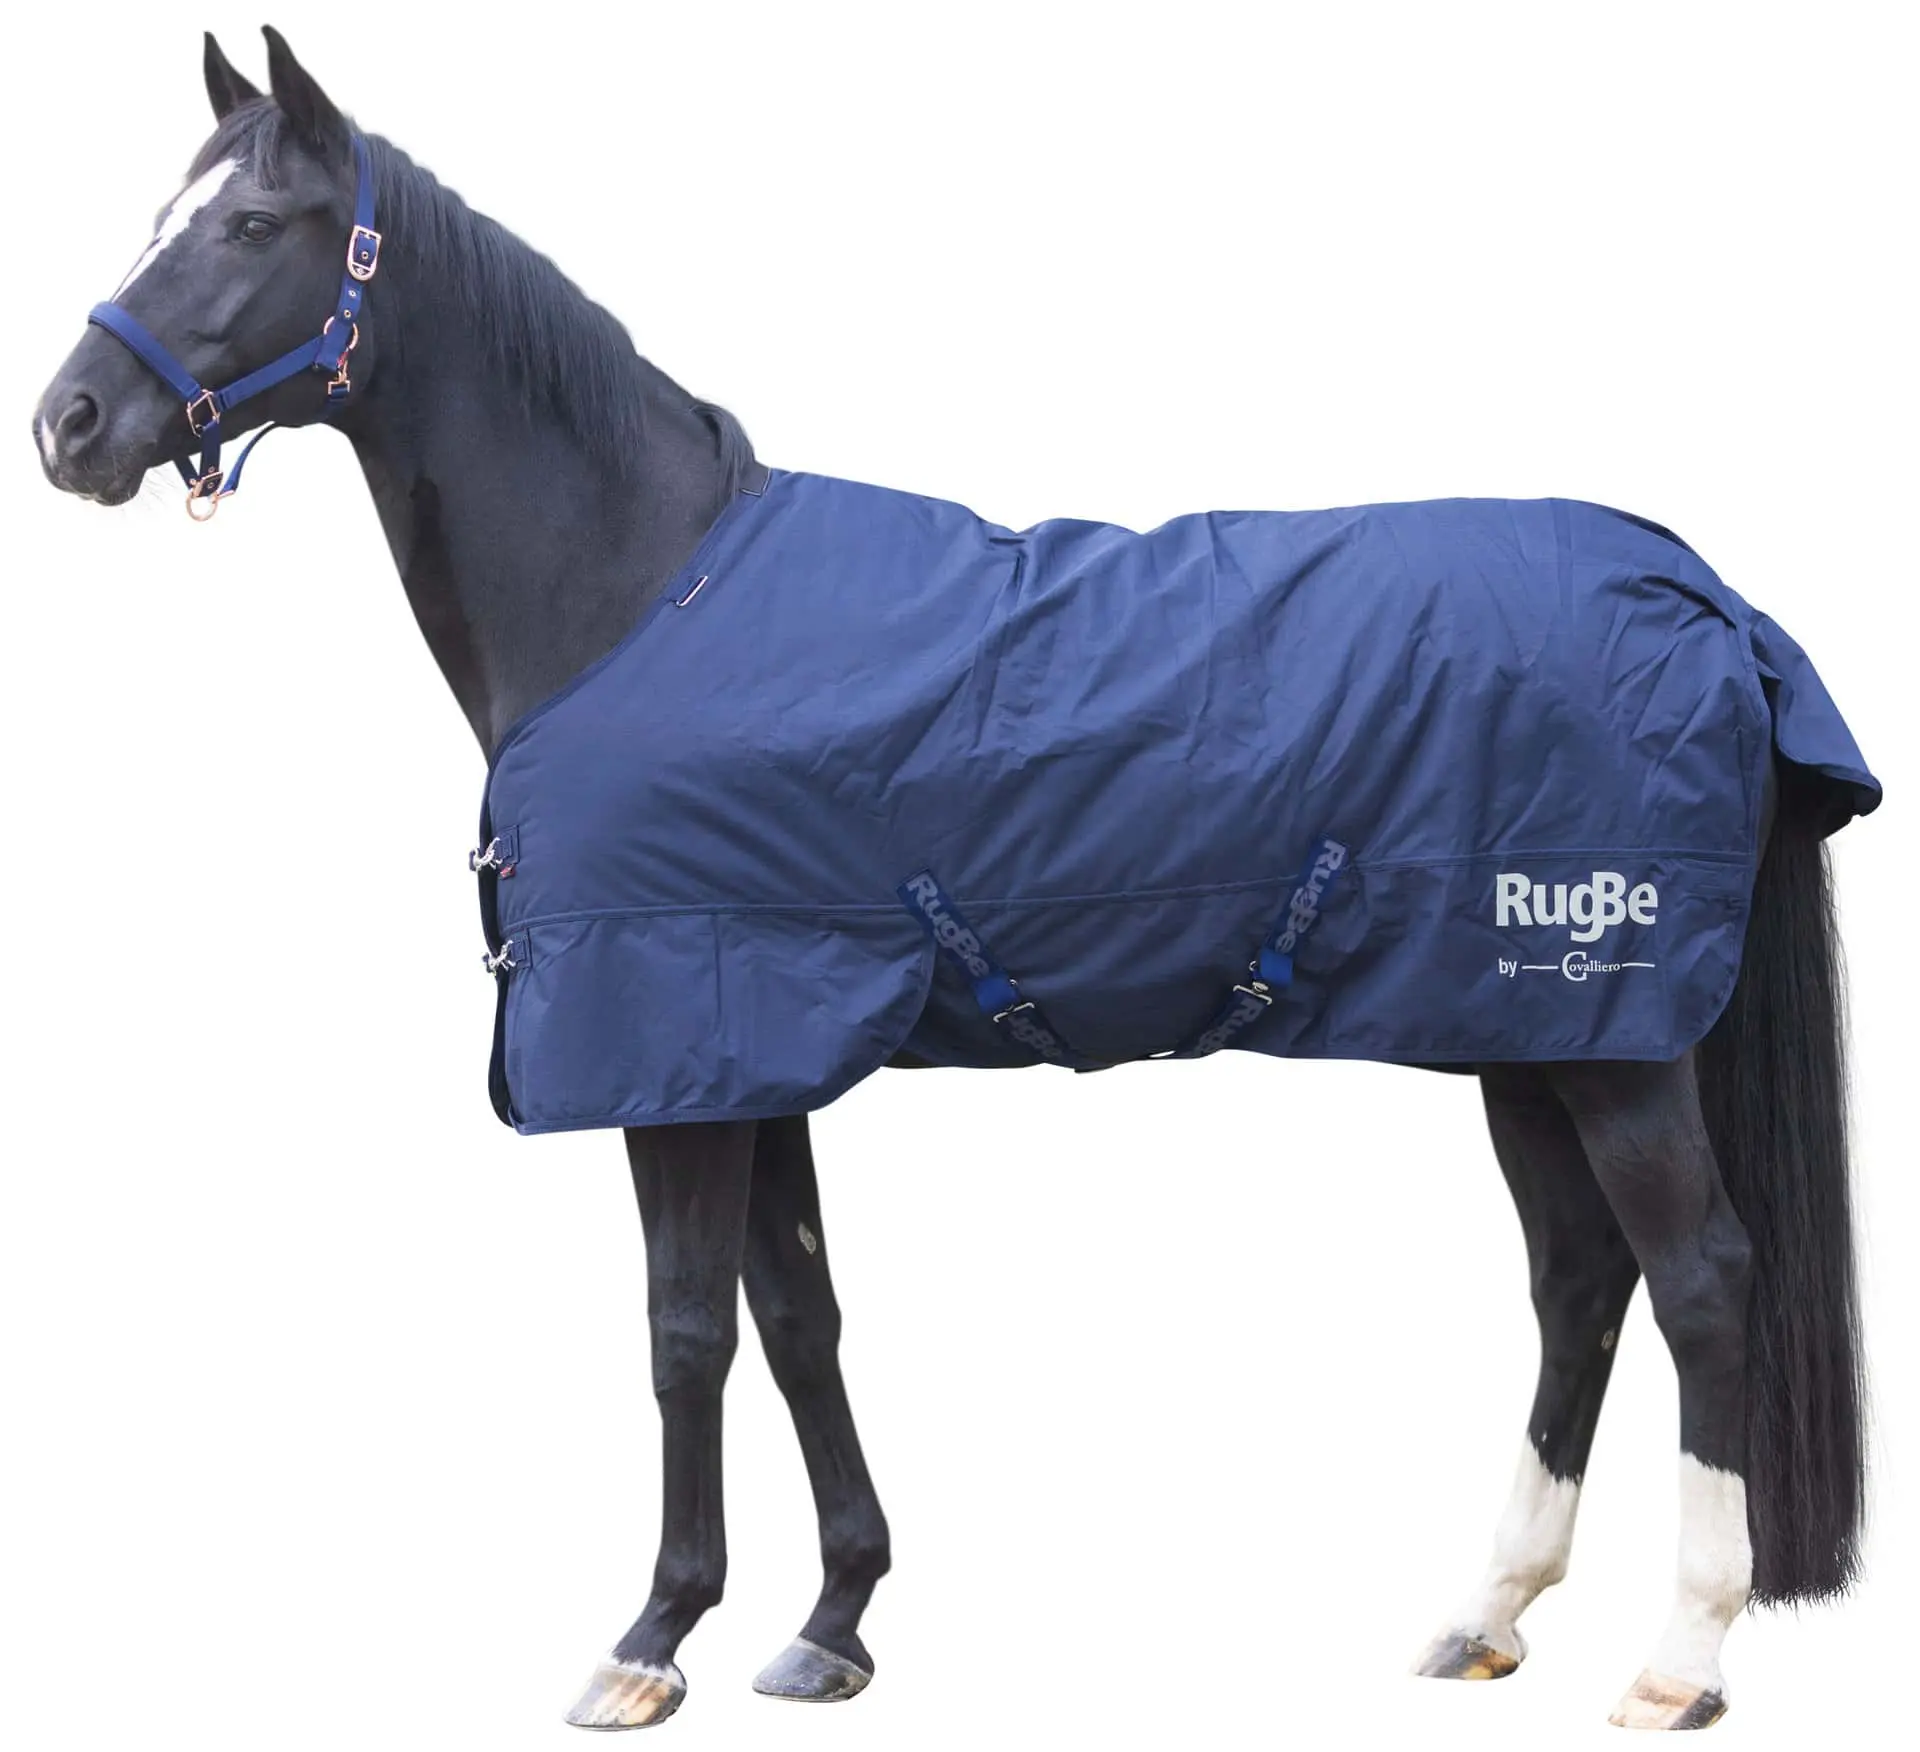 Winter horse blanket RugBe IceProtect 300g